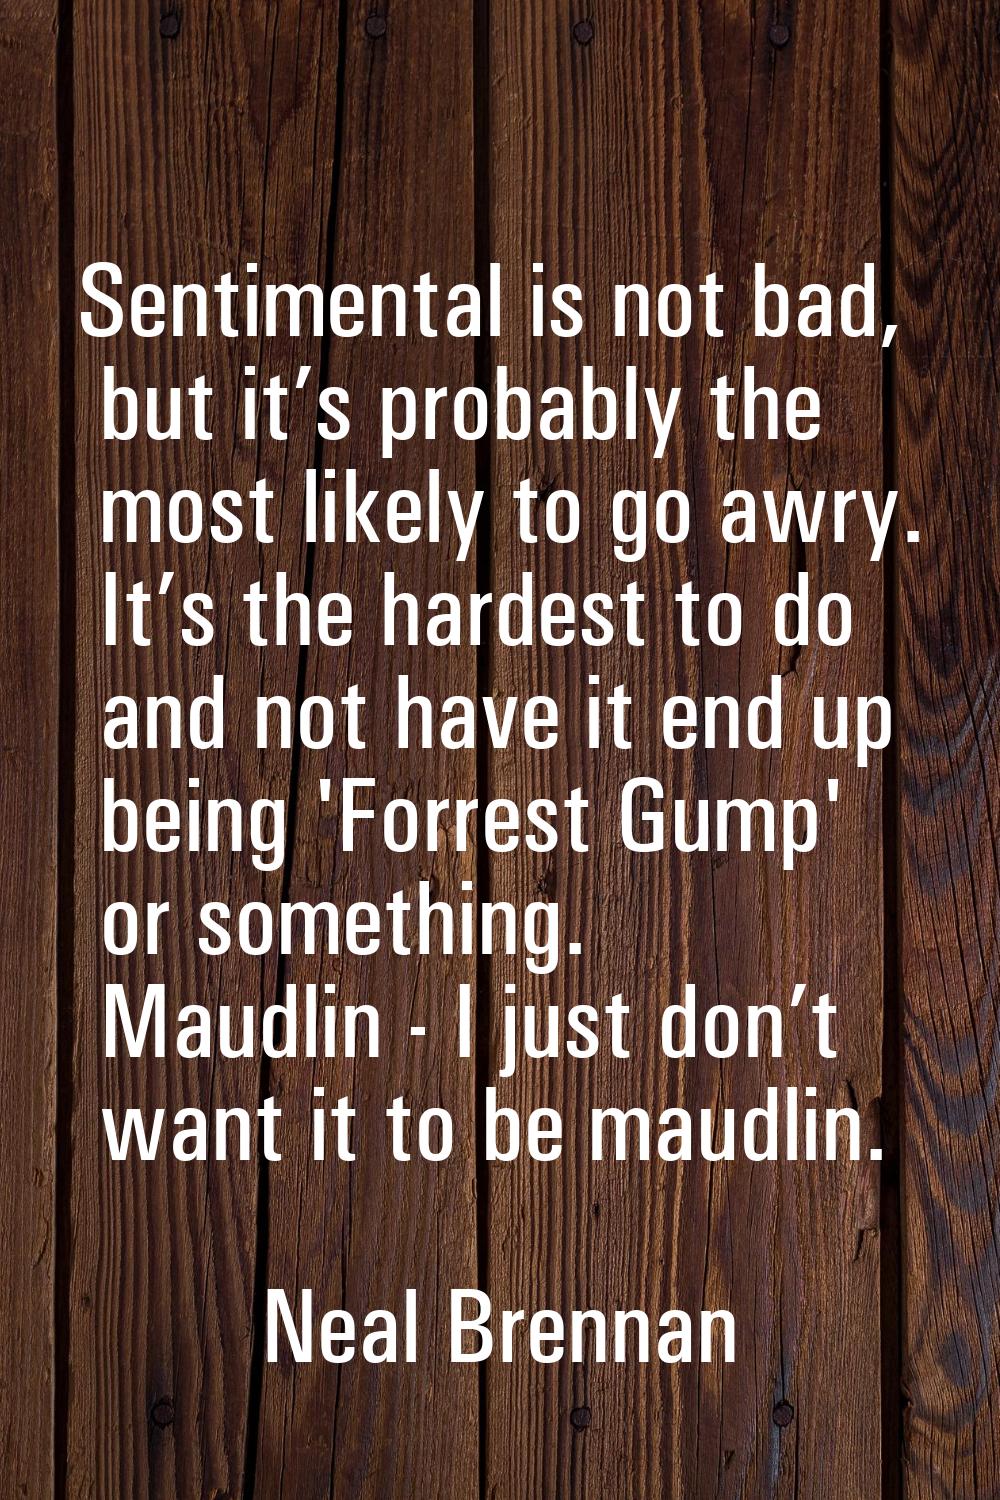 Sentimental is not bad, but it’s probably the most likely to go awry. It’s the hardest to do and no